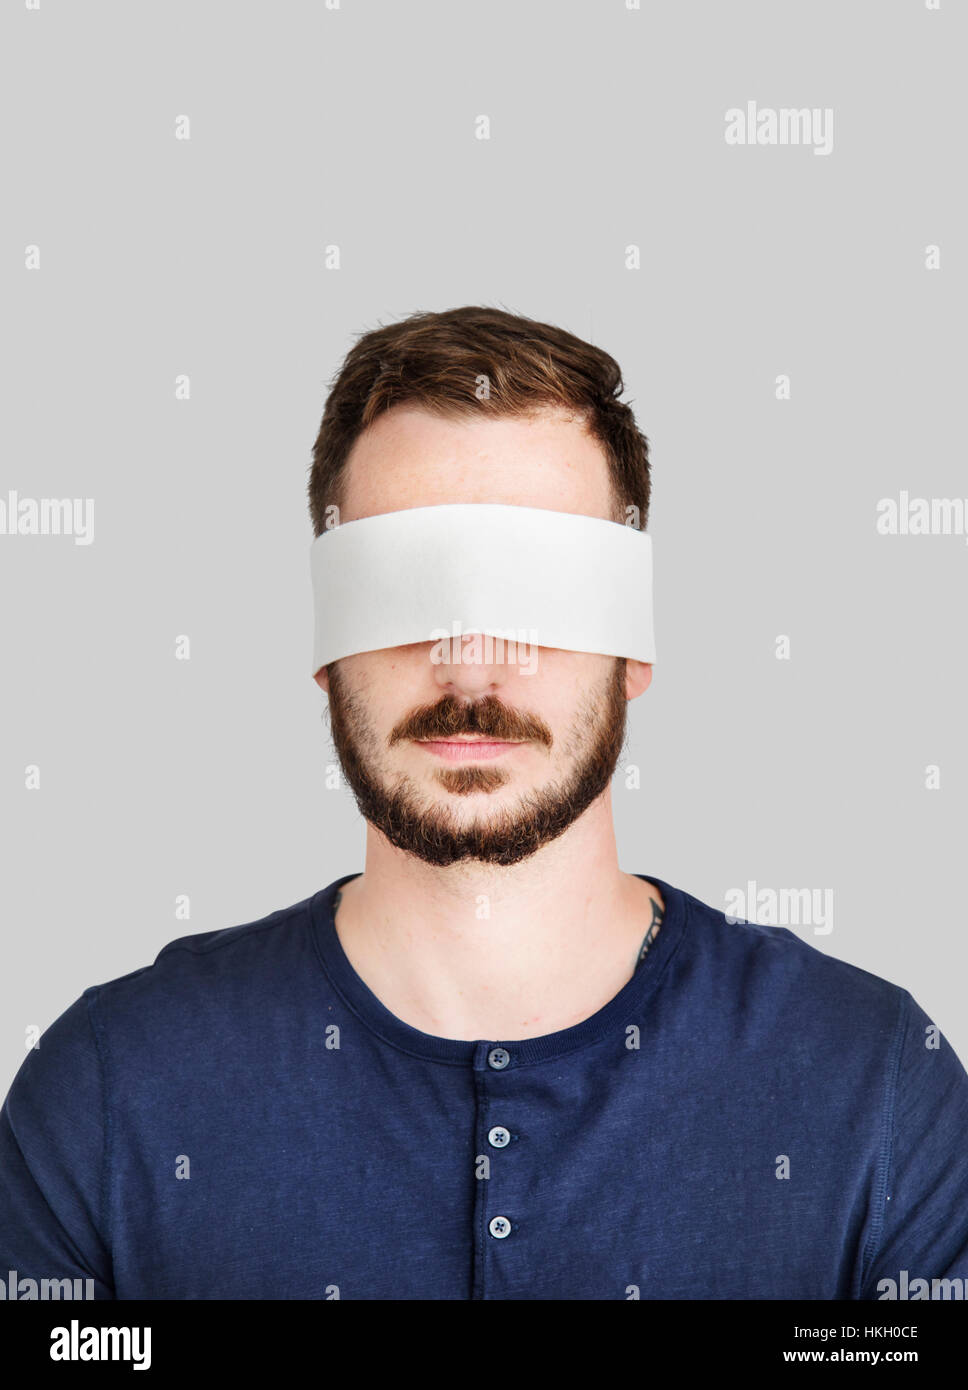 Handsome Man Covering Eyes Blind Concept Stock Photo - Alamy